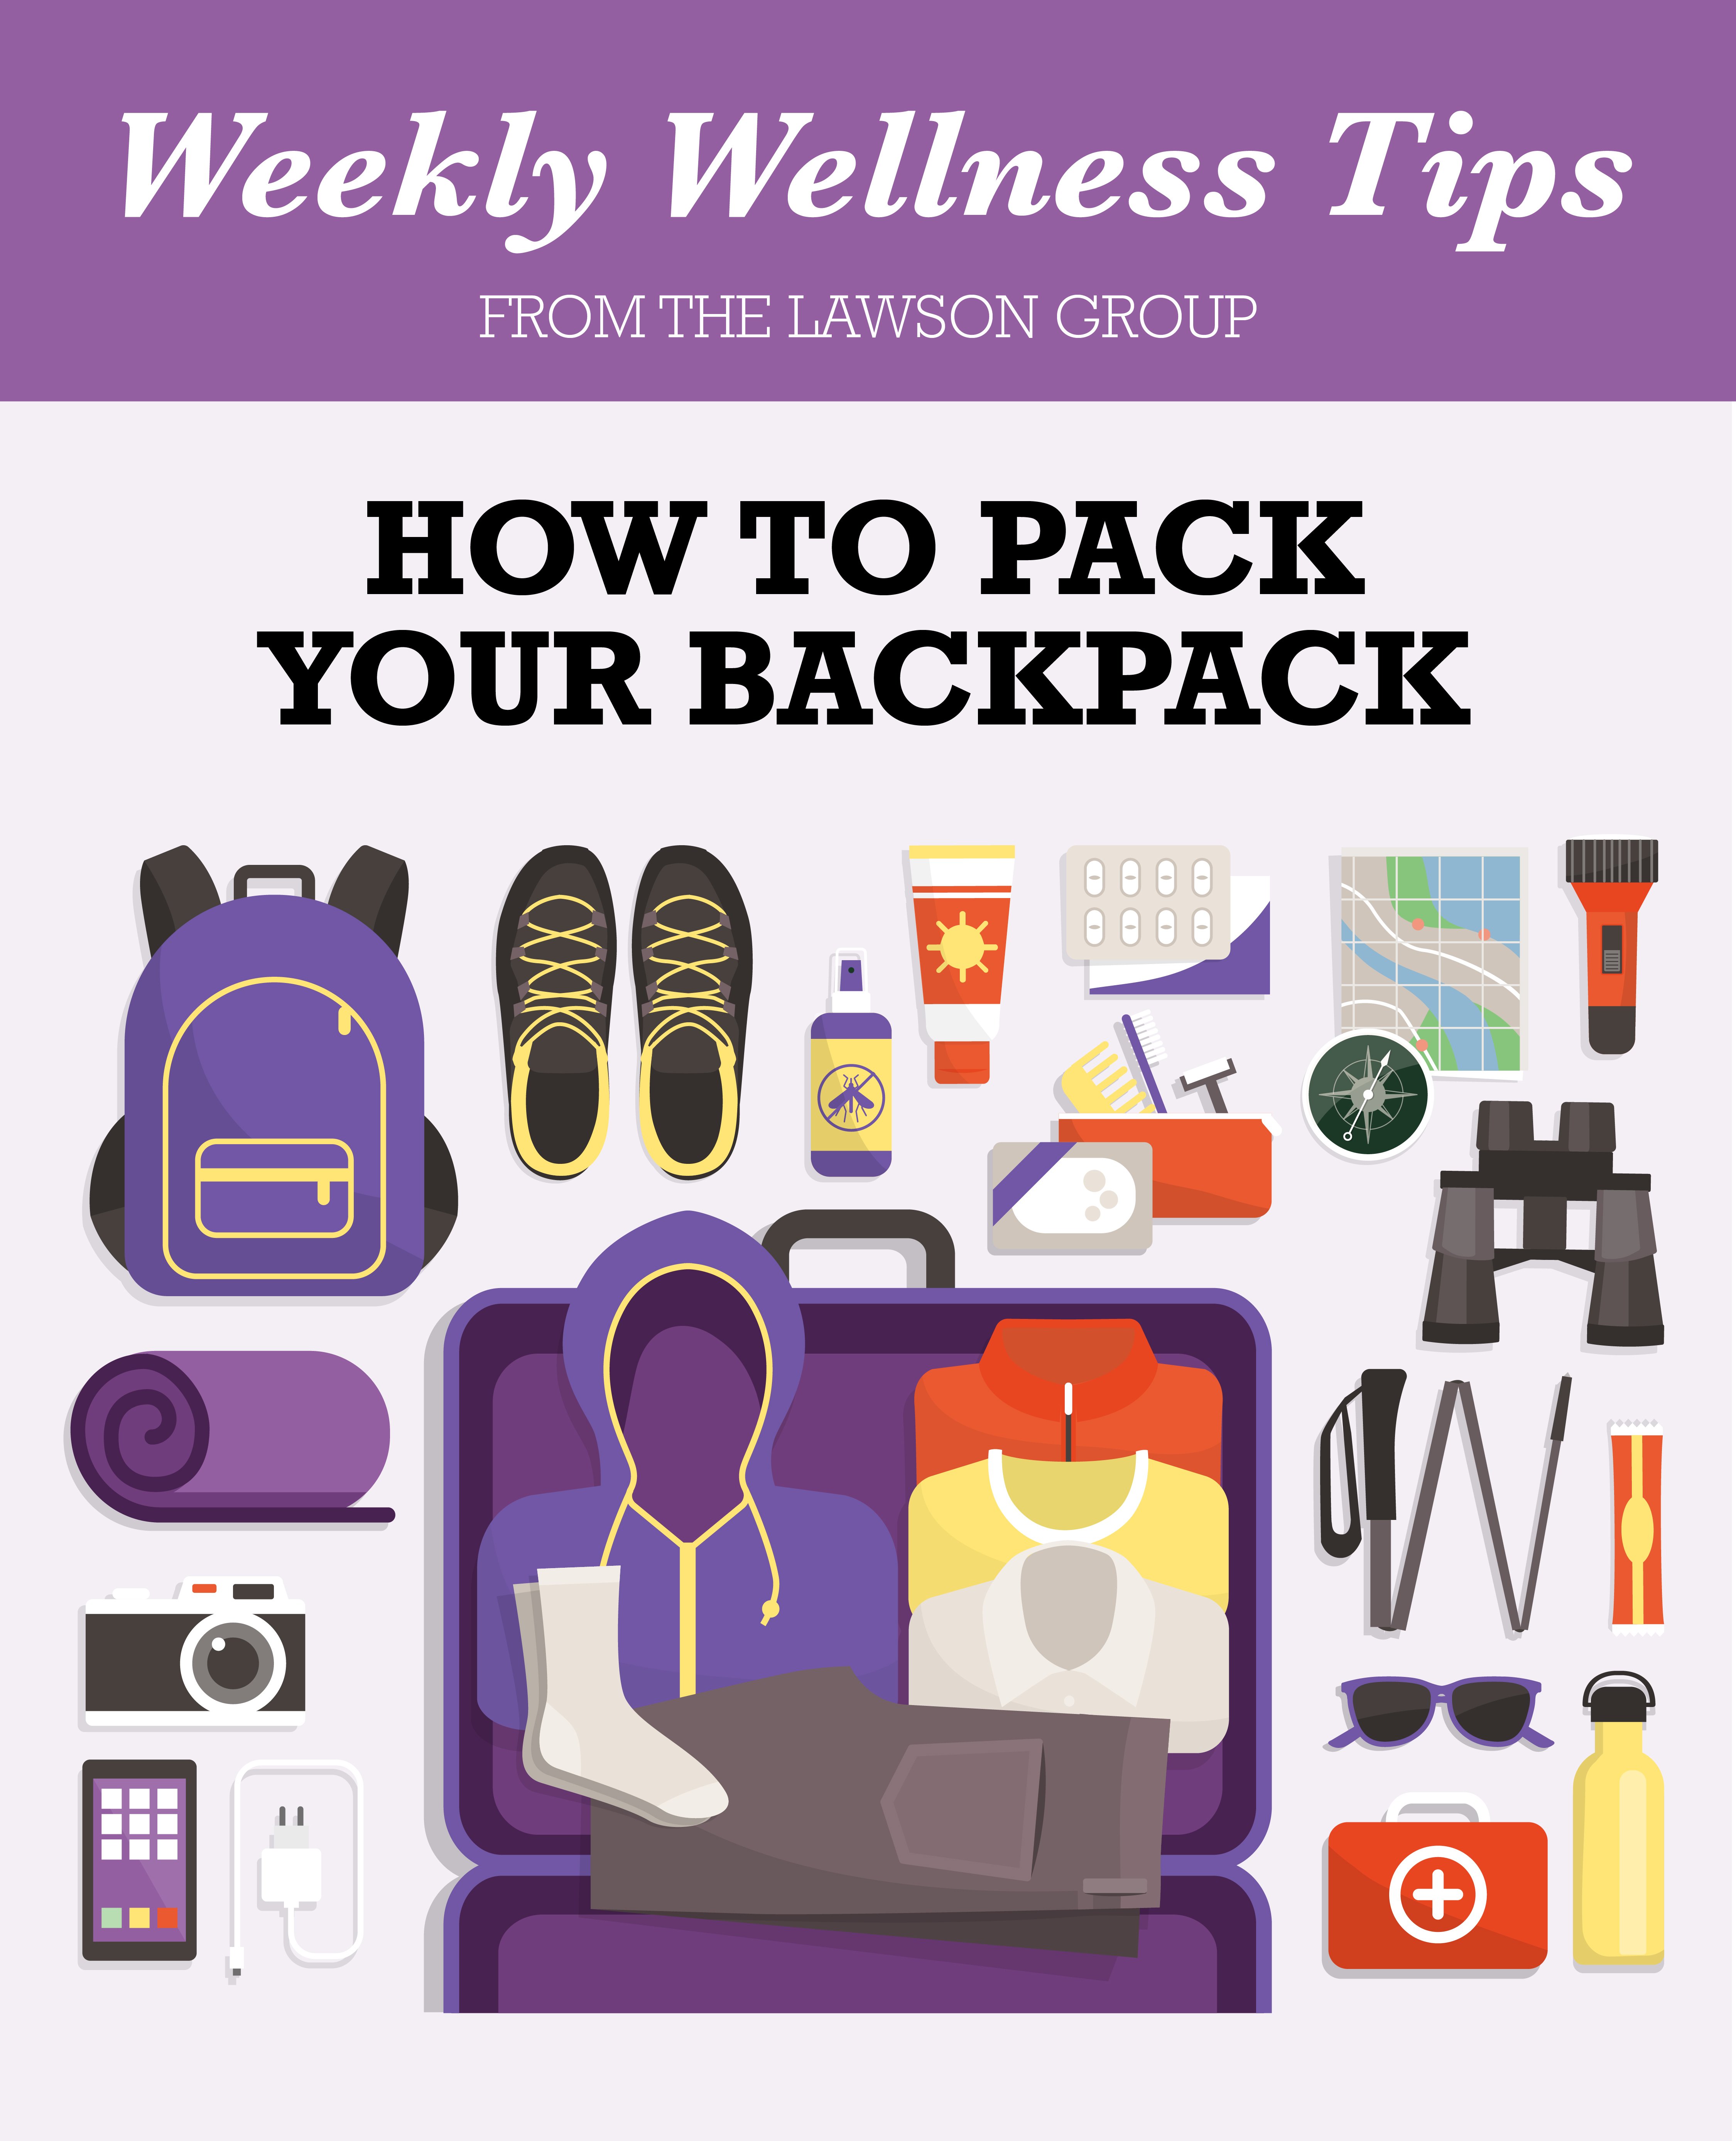 TLG22005 Wellness Tips How to Pack Your Backpack Infographic-1080px-01